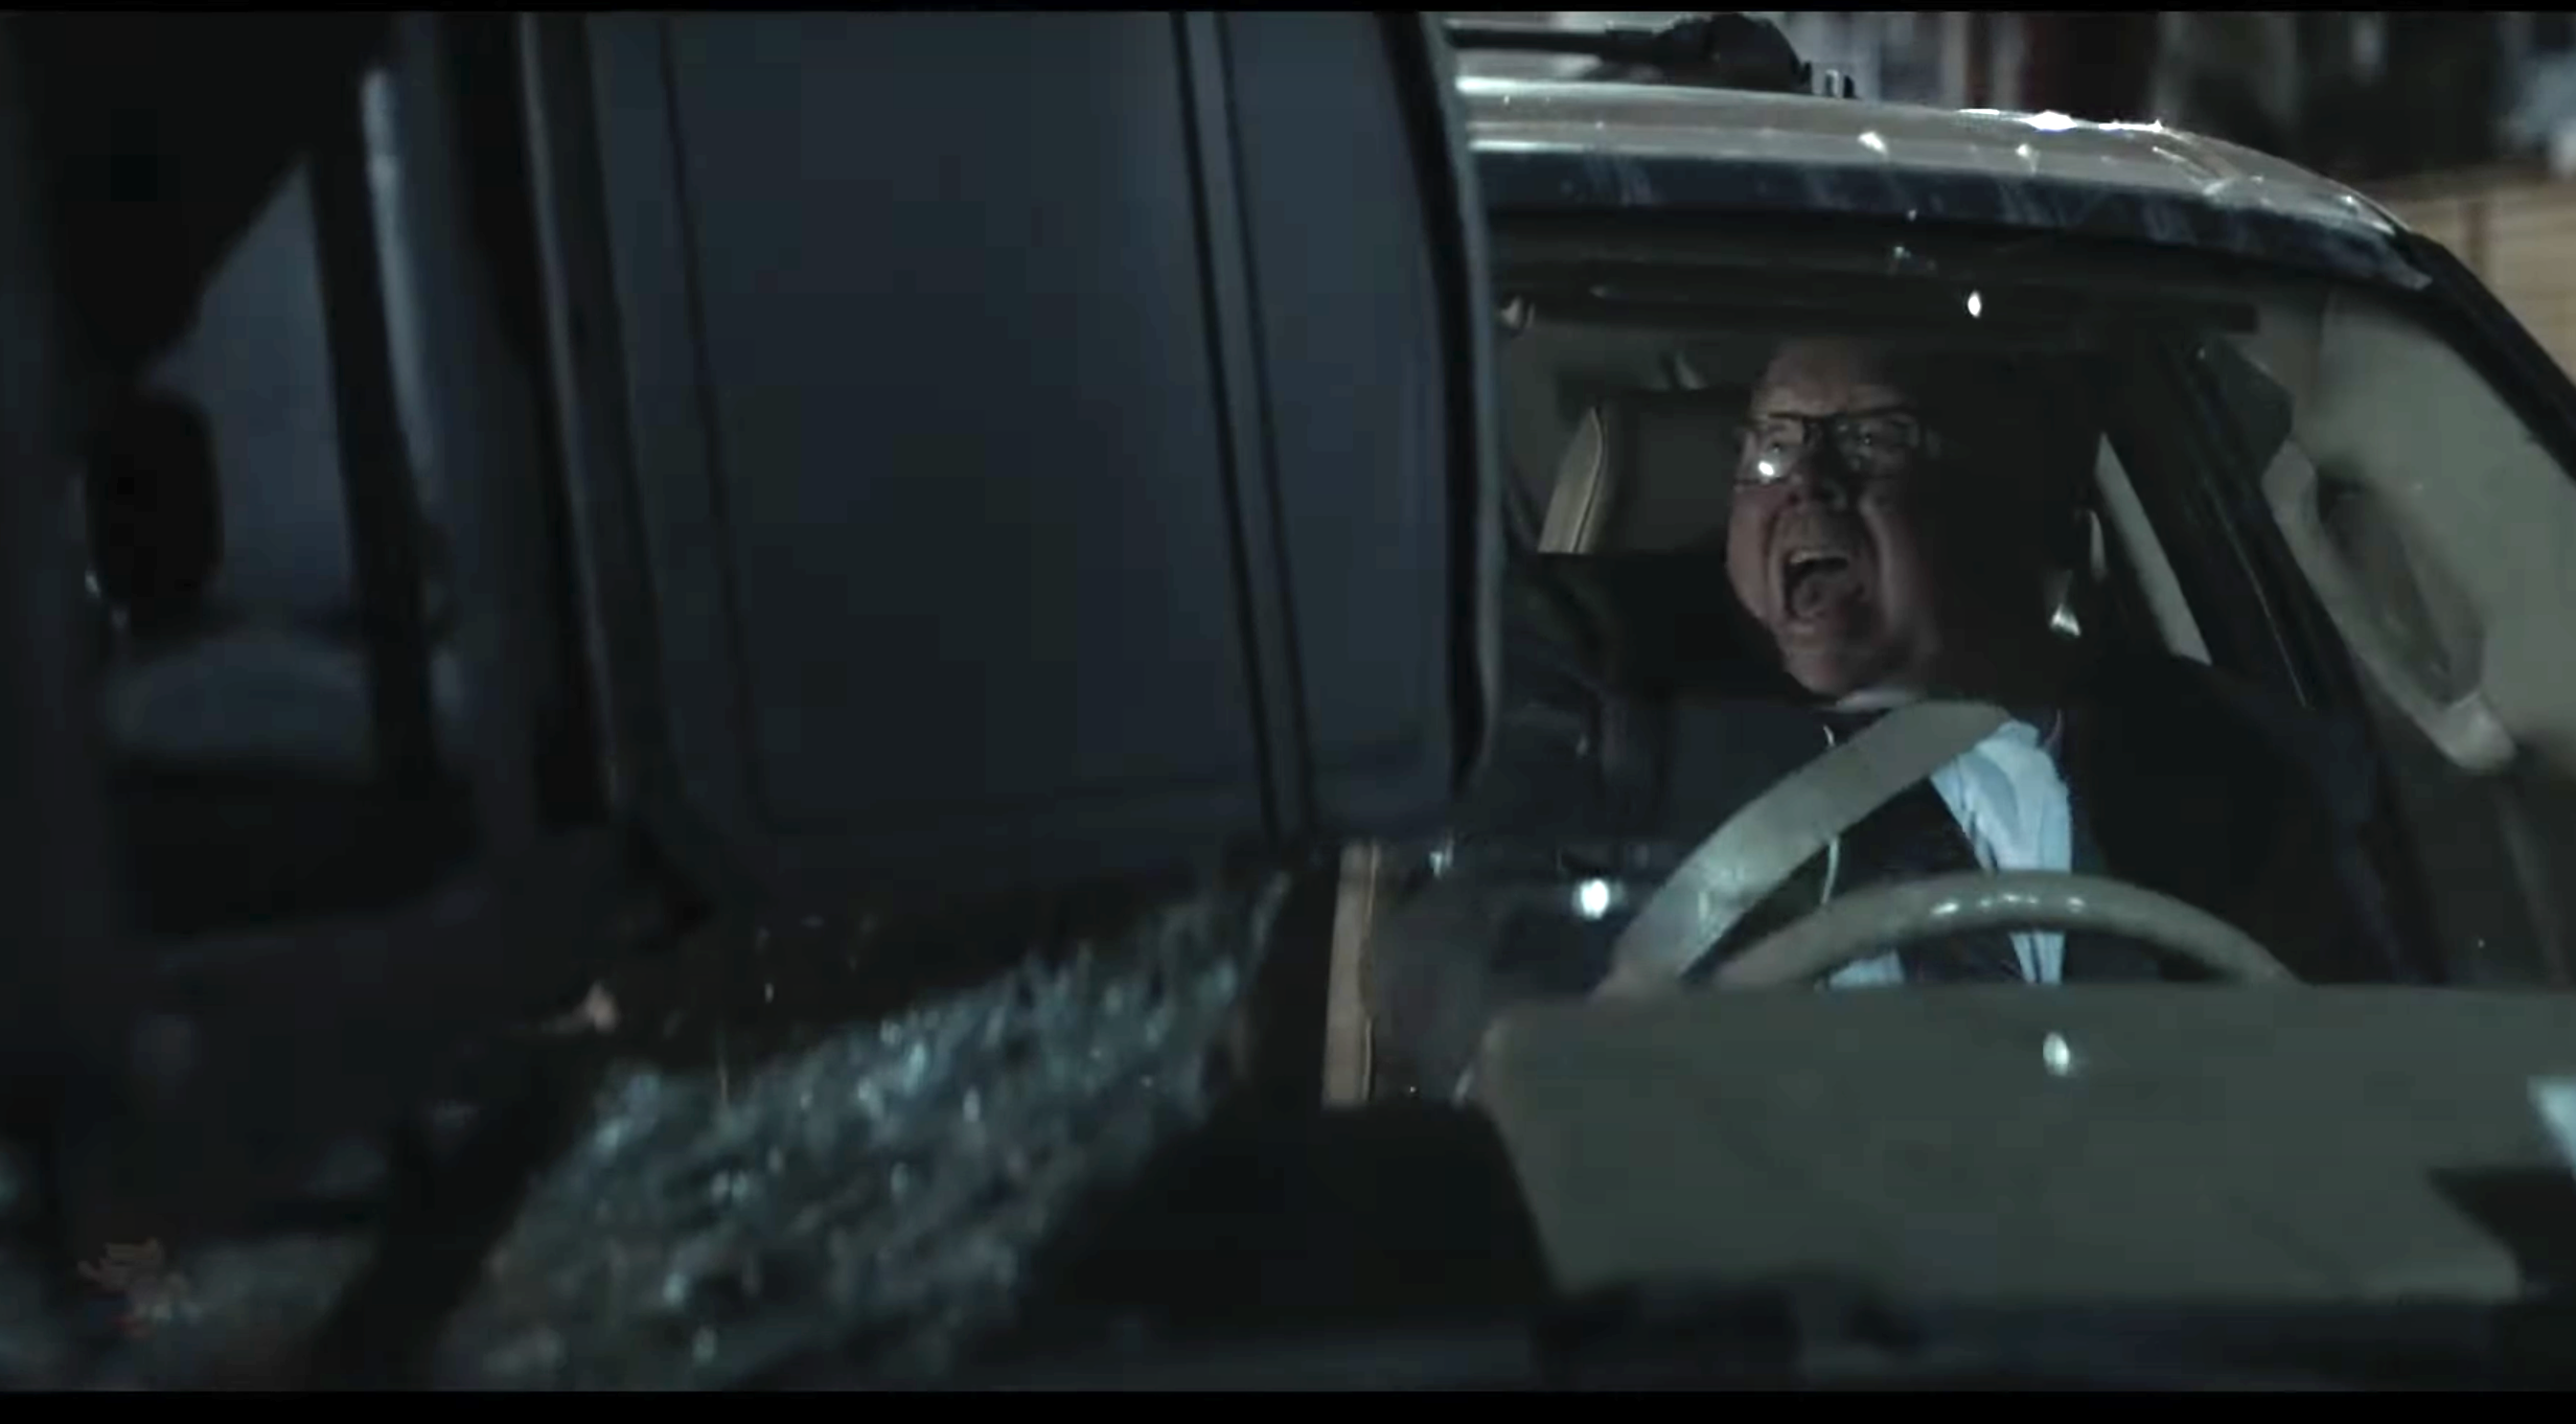 A bad guy reacts to having a grill thrown through his windshield by Jack Reacher